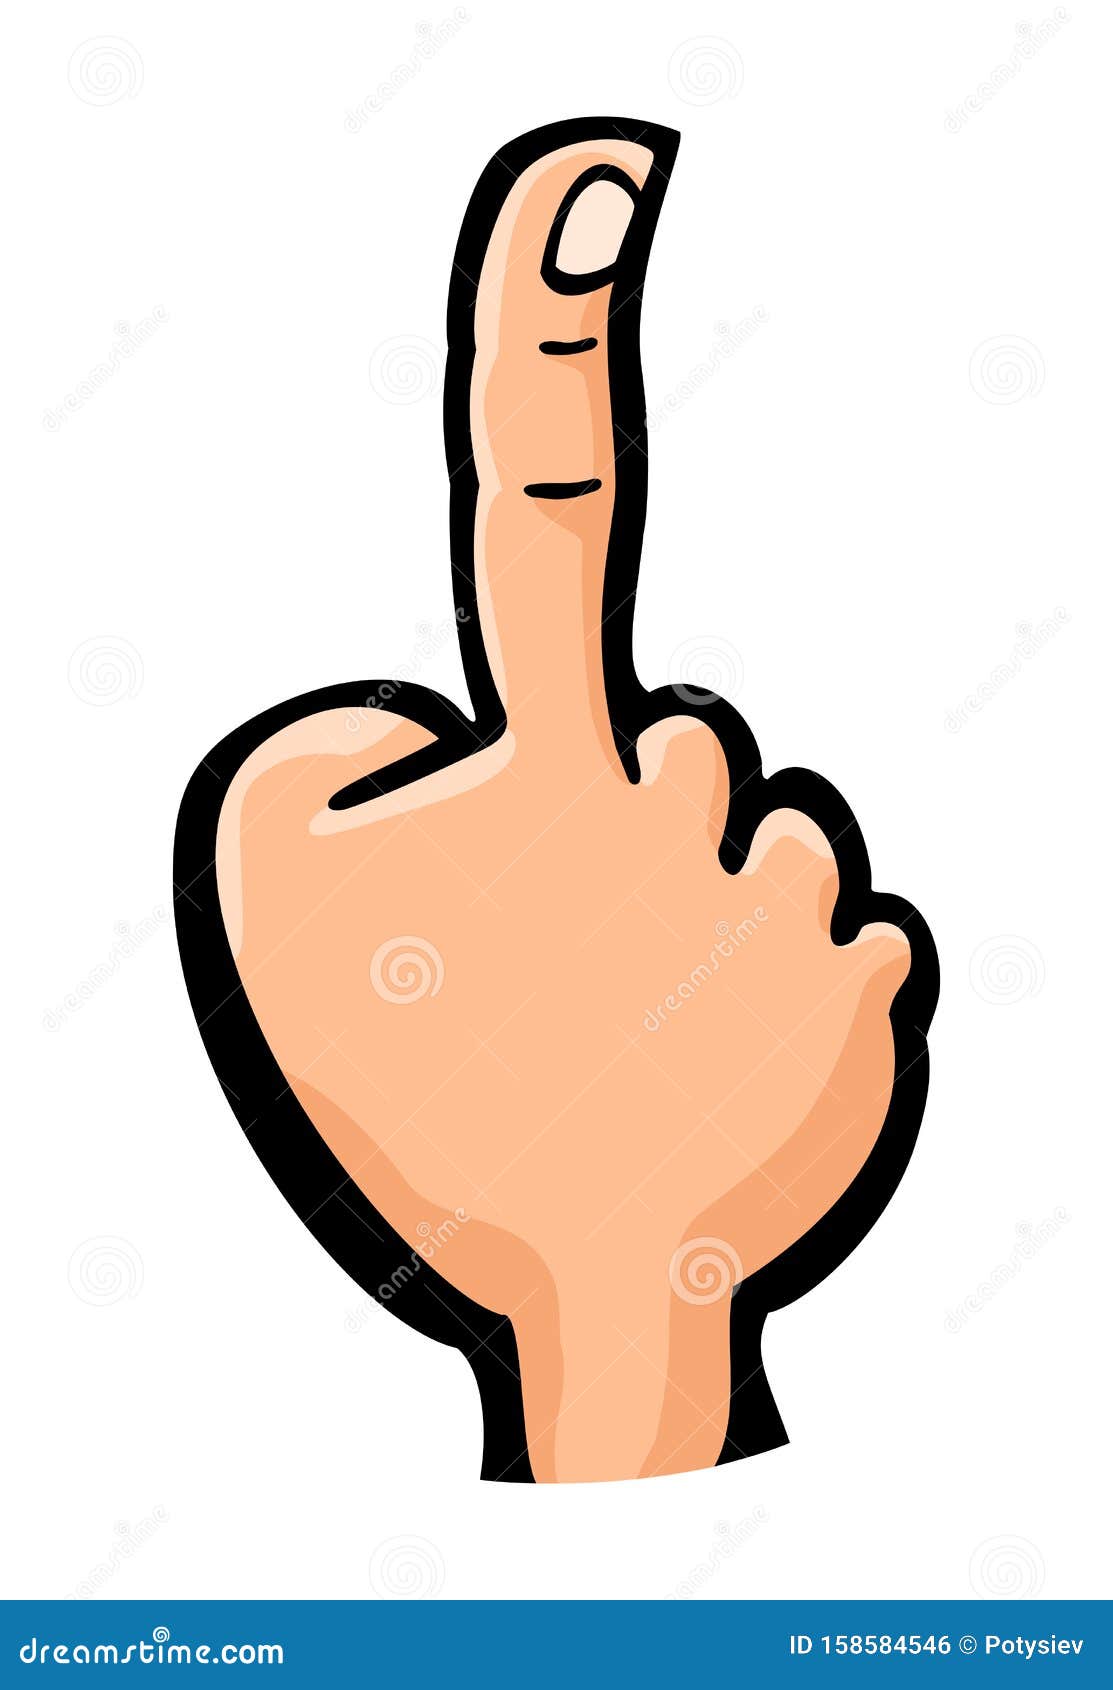 Male Pointing One Finger. Vector Color Vintage Engraving Stock Vector